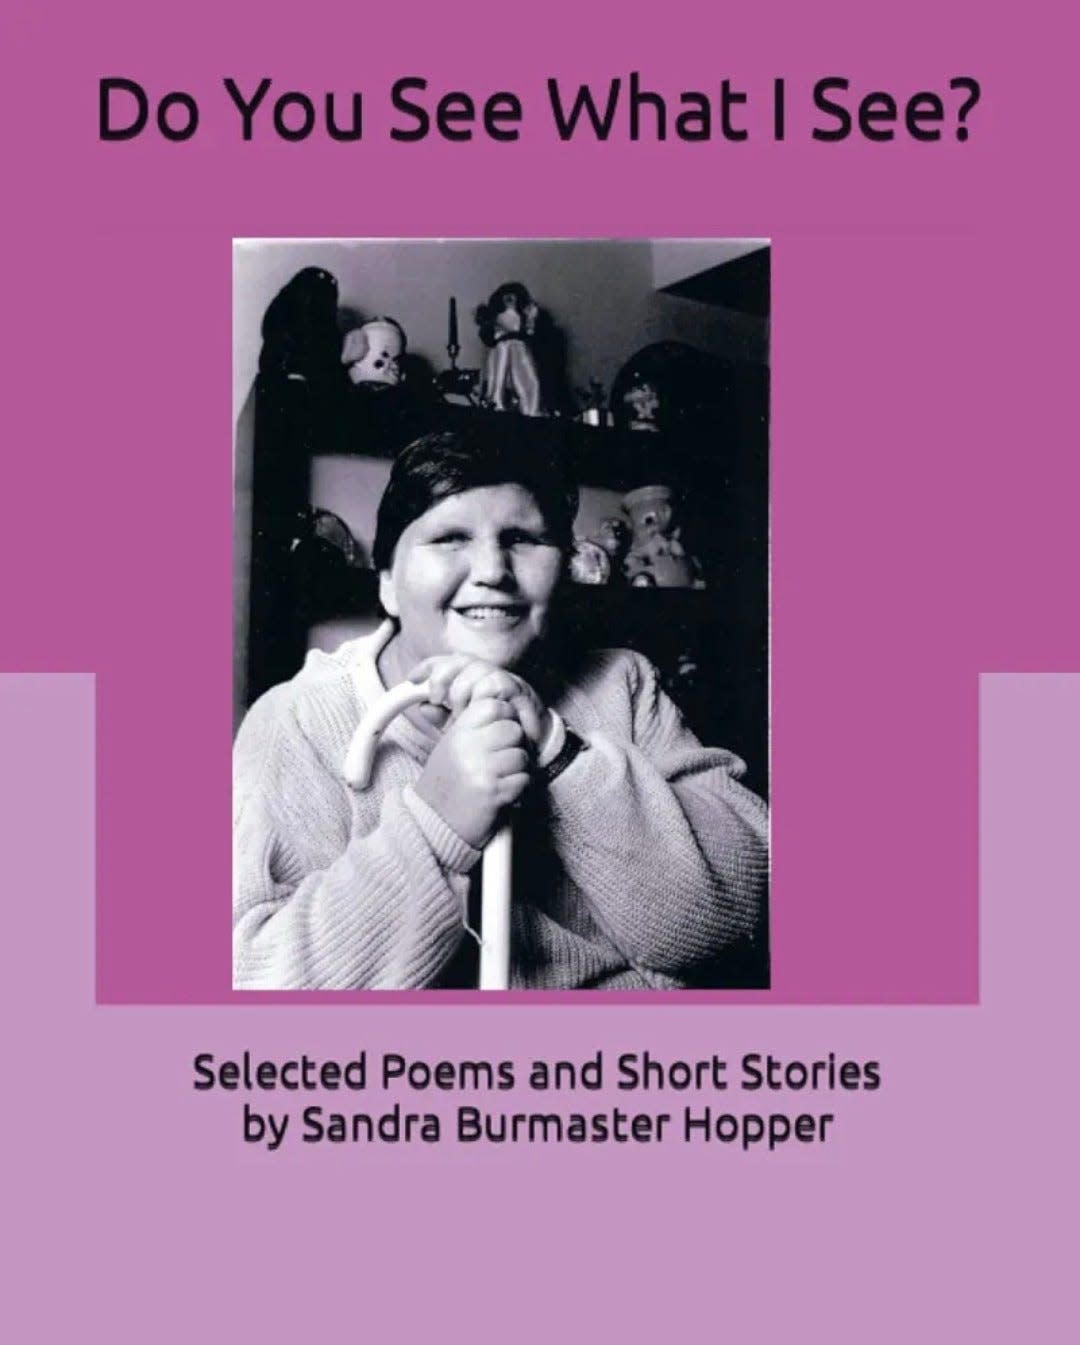 Do You See What I See? by Sandy Hopper was recently published after her death by friends and family.